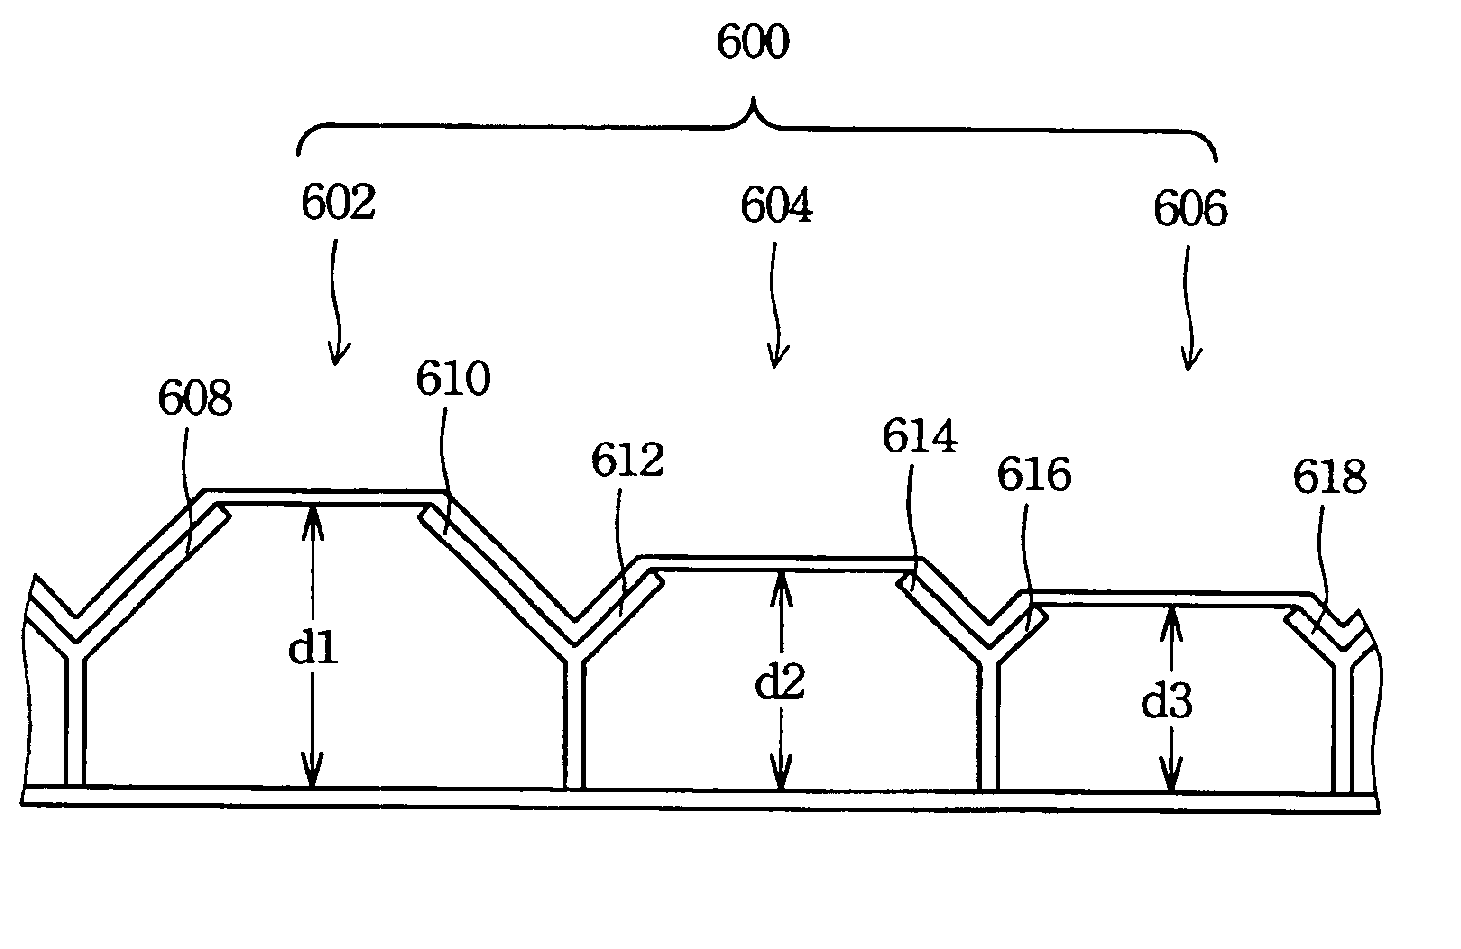 Structure of an optical interference display cell